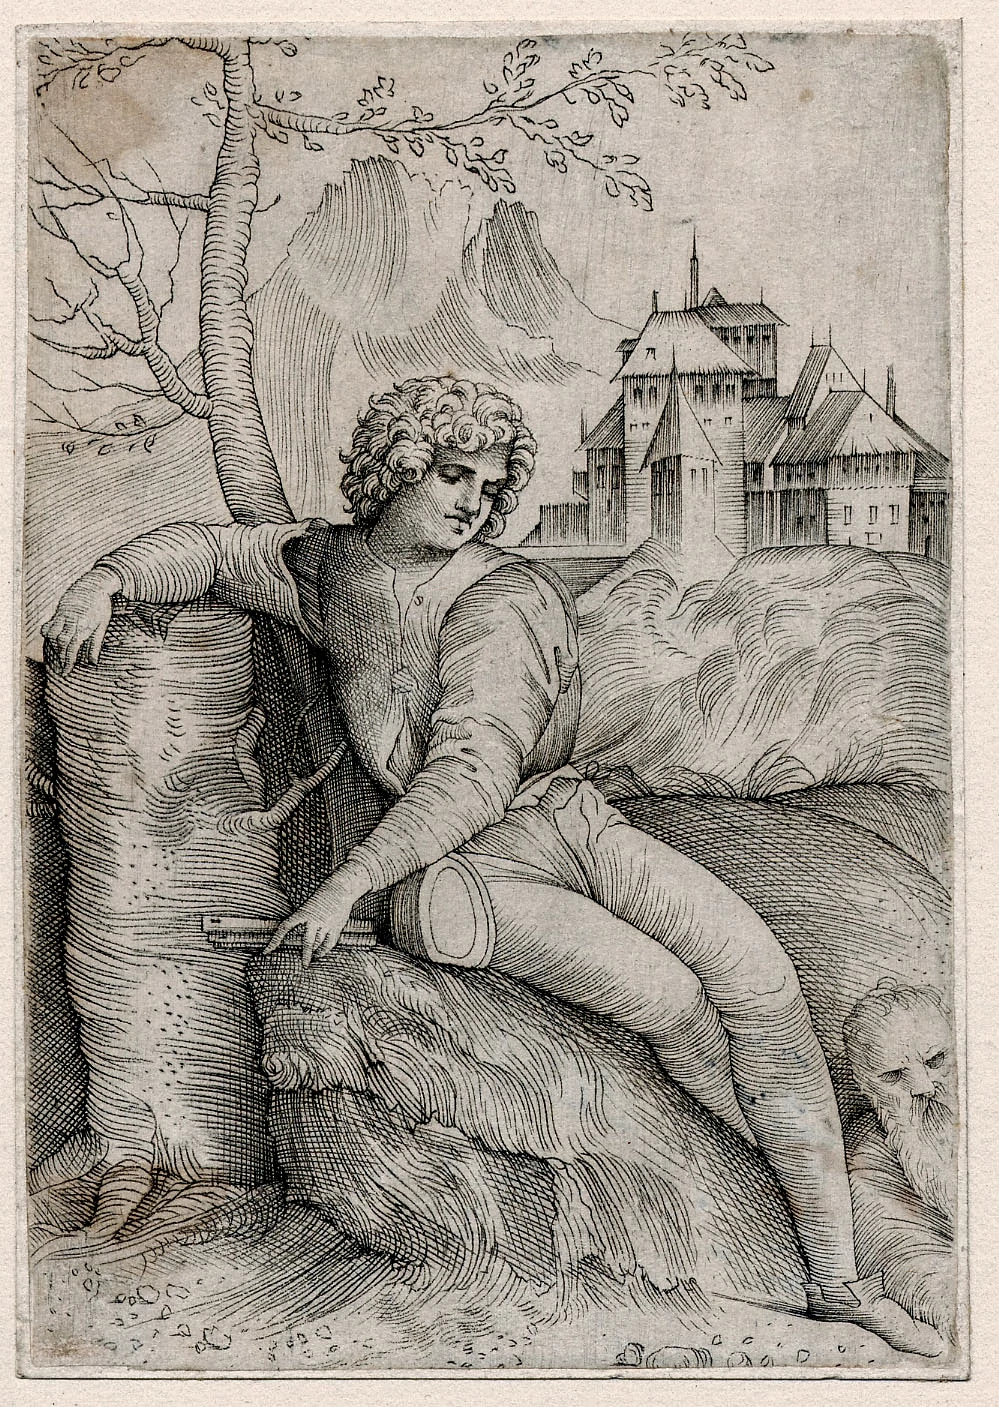 Shepherd by a tree (Cross Hatched), Giulio Campagnola